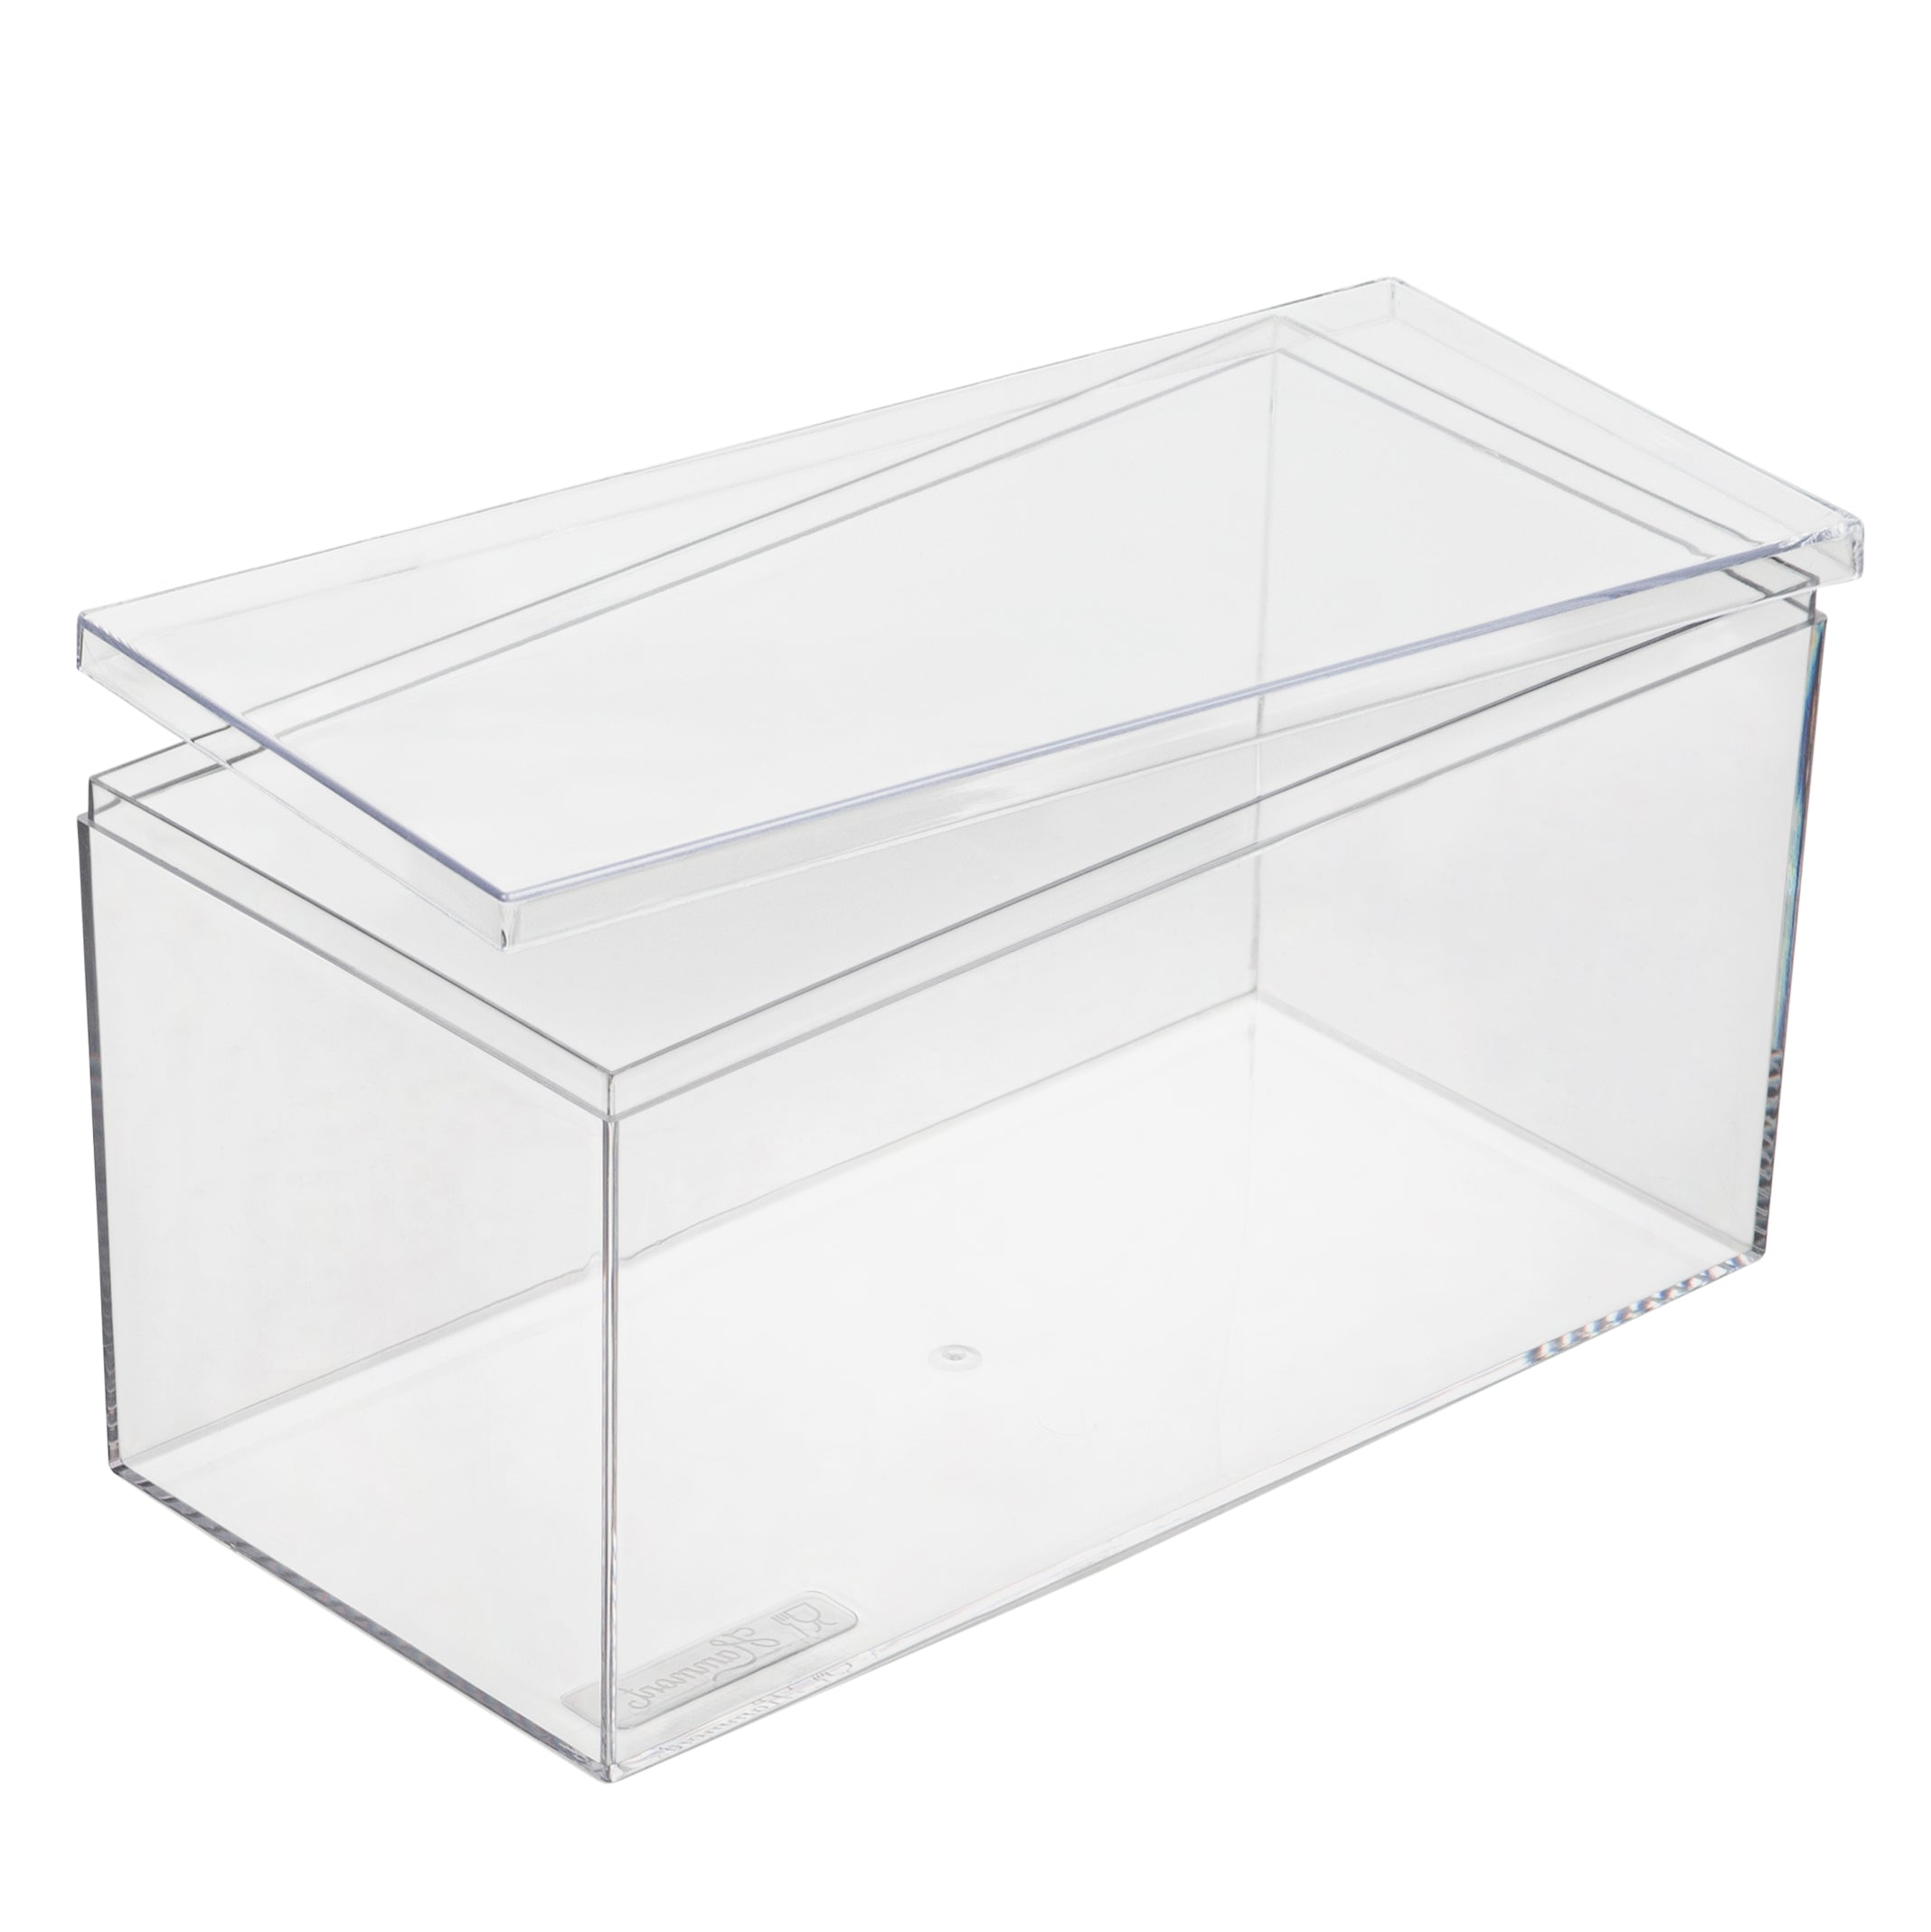 Home Expressions Acrylic 4-pc. Stackable Storage Bin Set